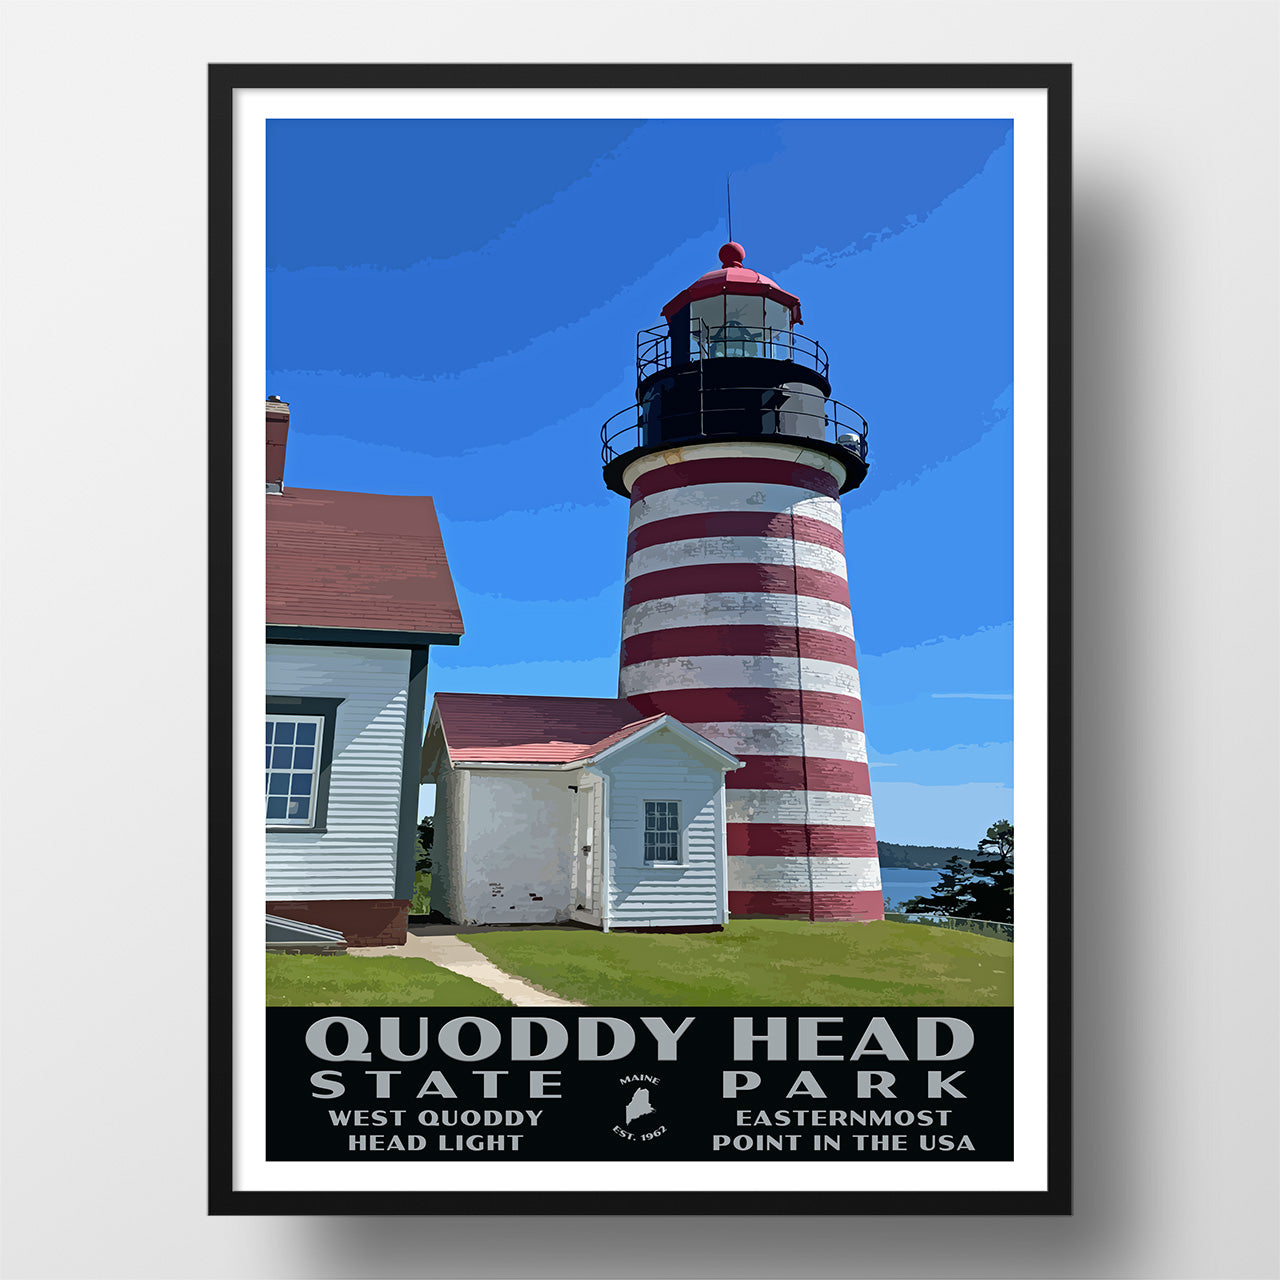 Quoddy Head State Park Poster - WPA (West Quoddy Head Lighthouse)